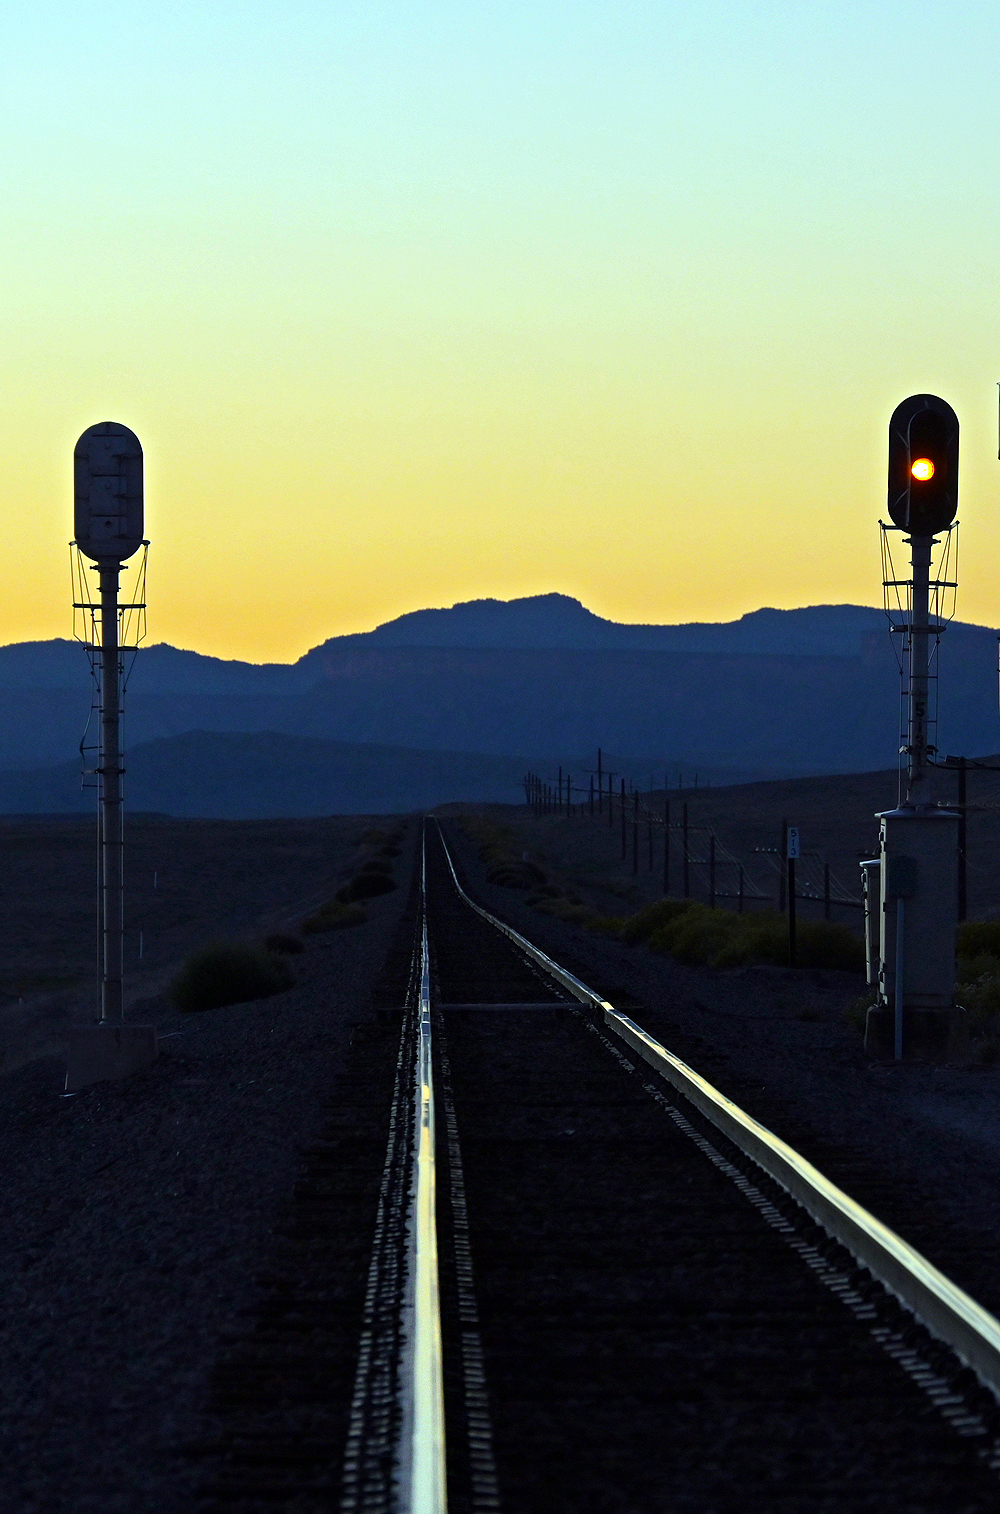 Color light signals are silhouetted against a desert sky with a mountain in the background.